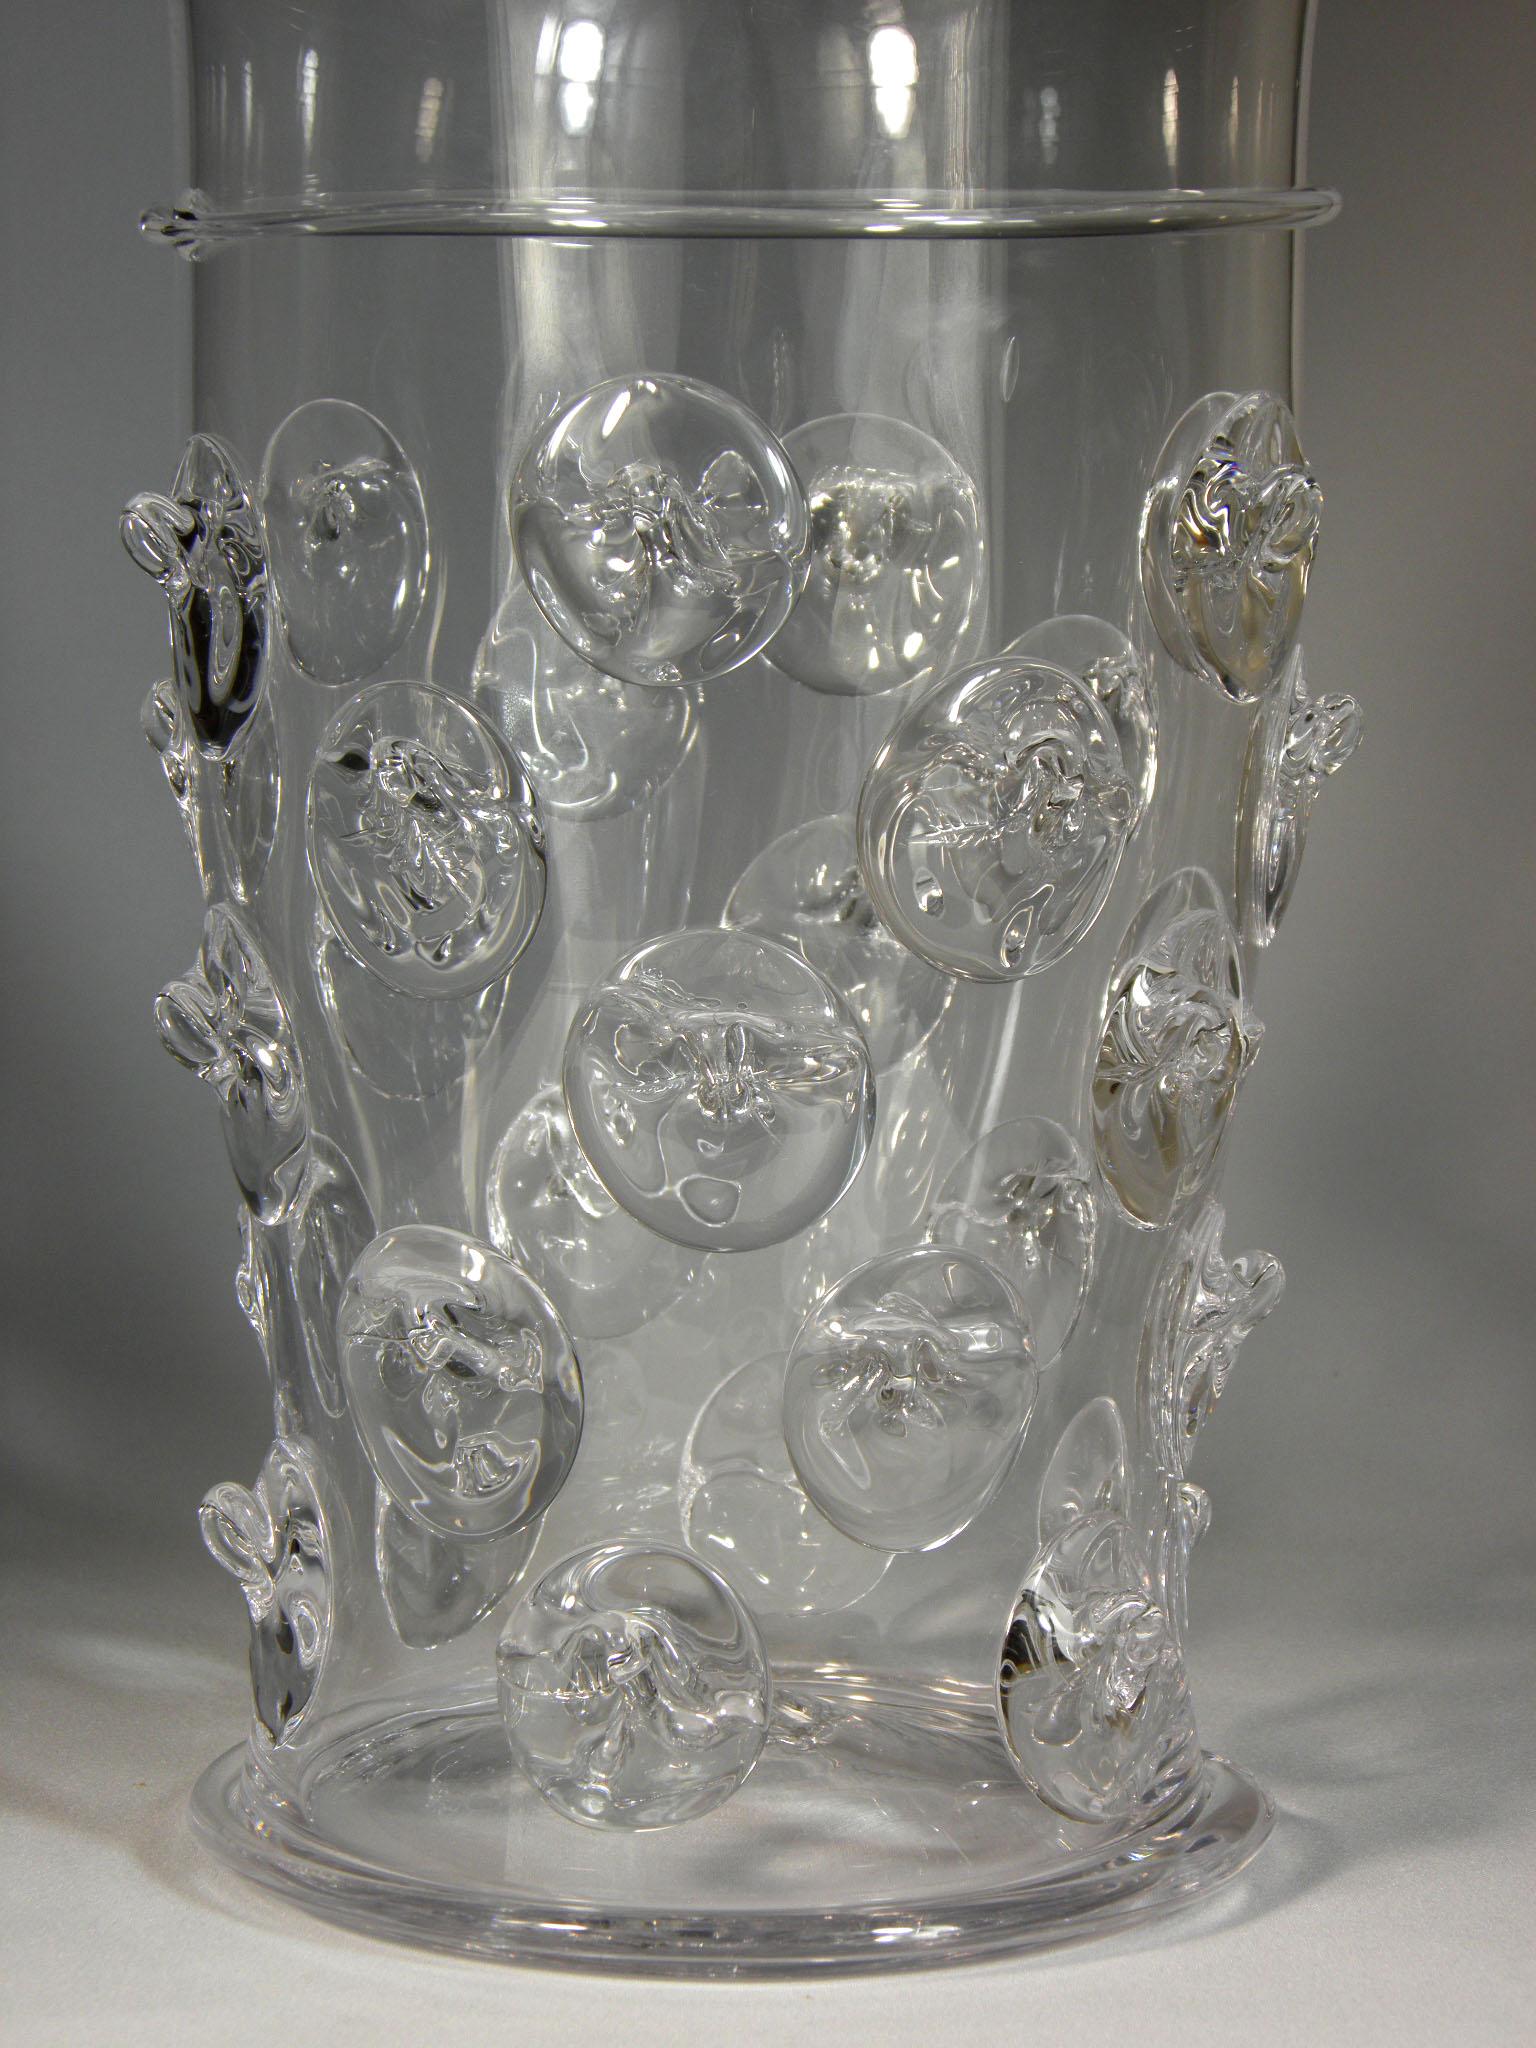 Handmade designer vase or ice container, This design piece was made in the Ajeto glass studio in northern Bohemia,
This studio collaborated with the artist, designer and architect (Borek Šípek 1949-2016) – undamaged.
   